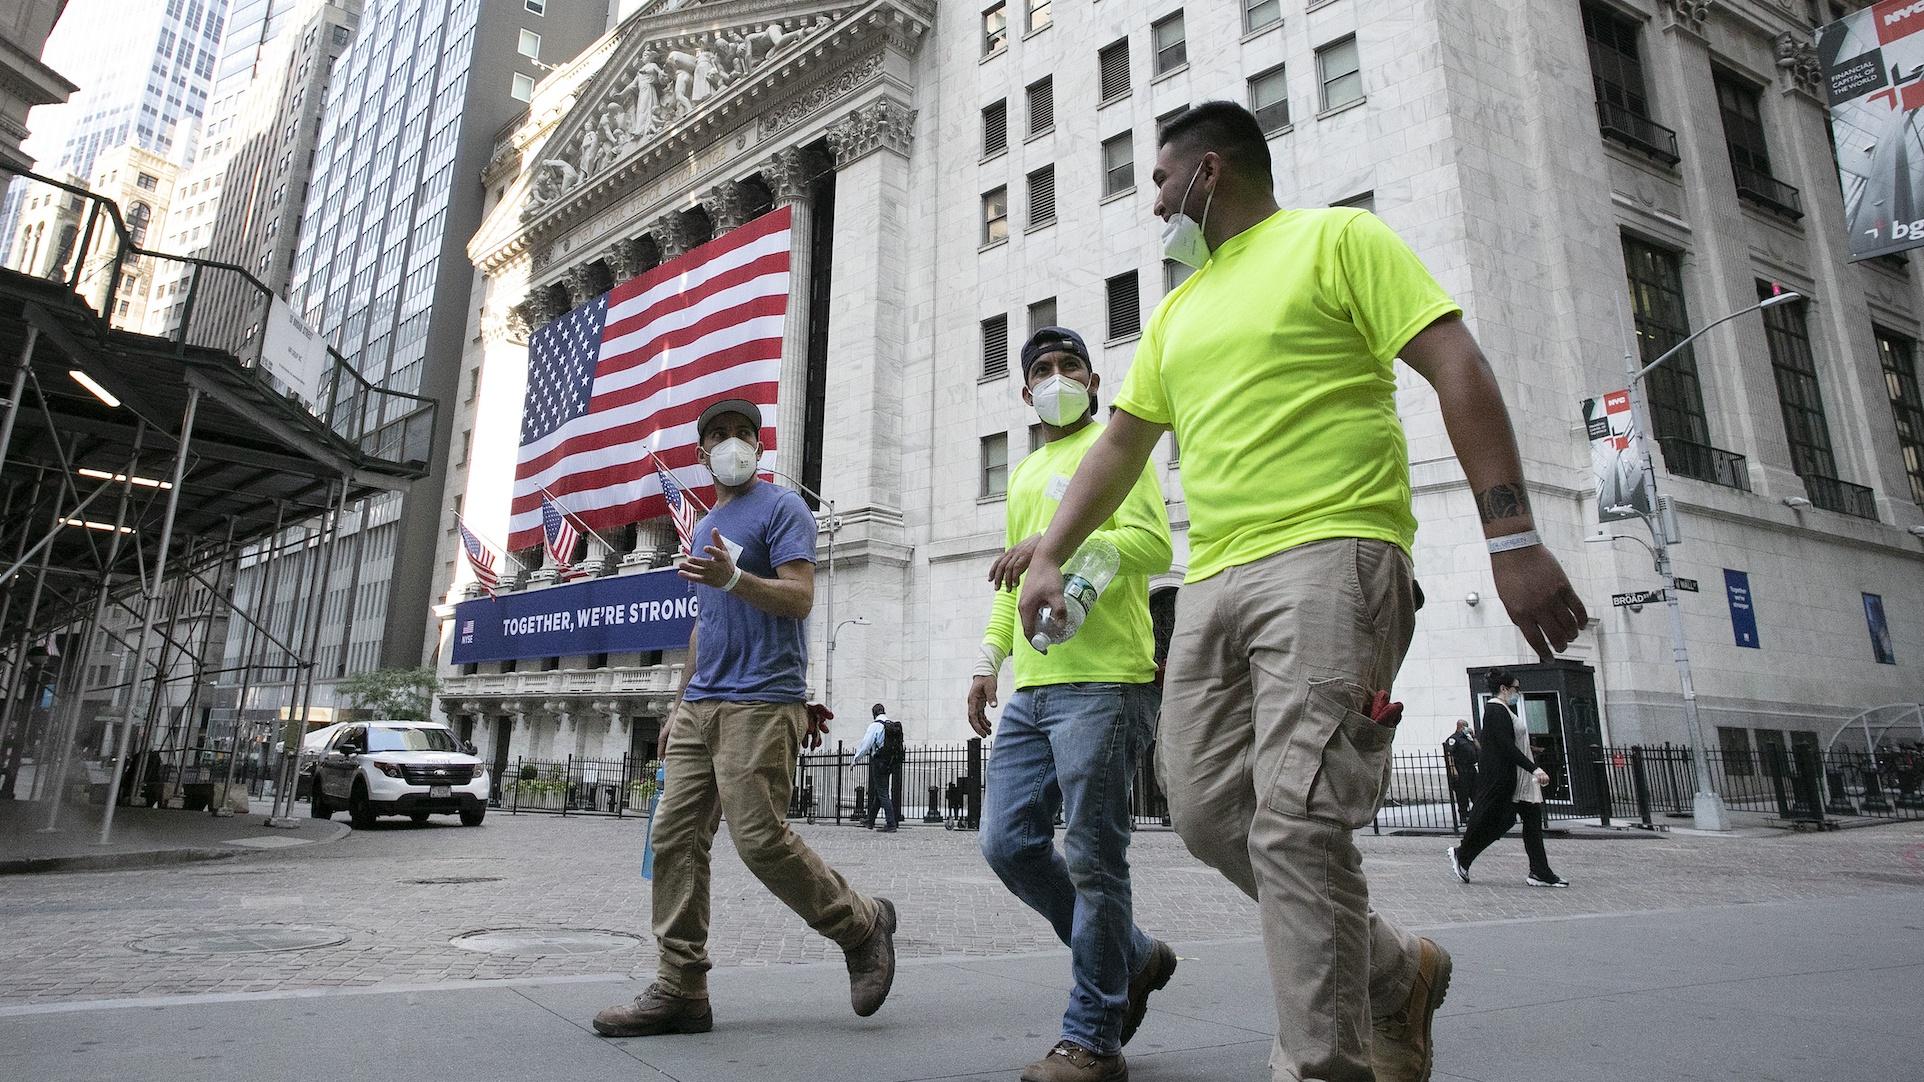 Workers wearing masks walk by the New York Stock Exchange during the coronavirus pandemic, Thursday, July 9, 2020, in New York. (AP Photo/Mark Lennihan)